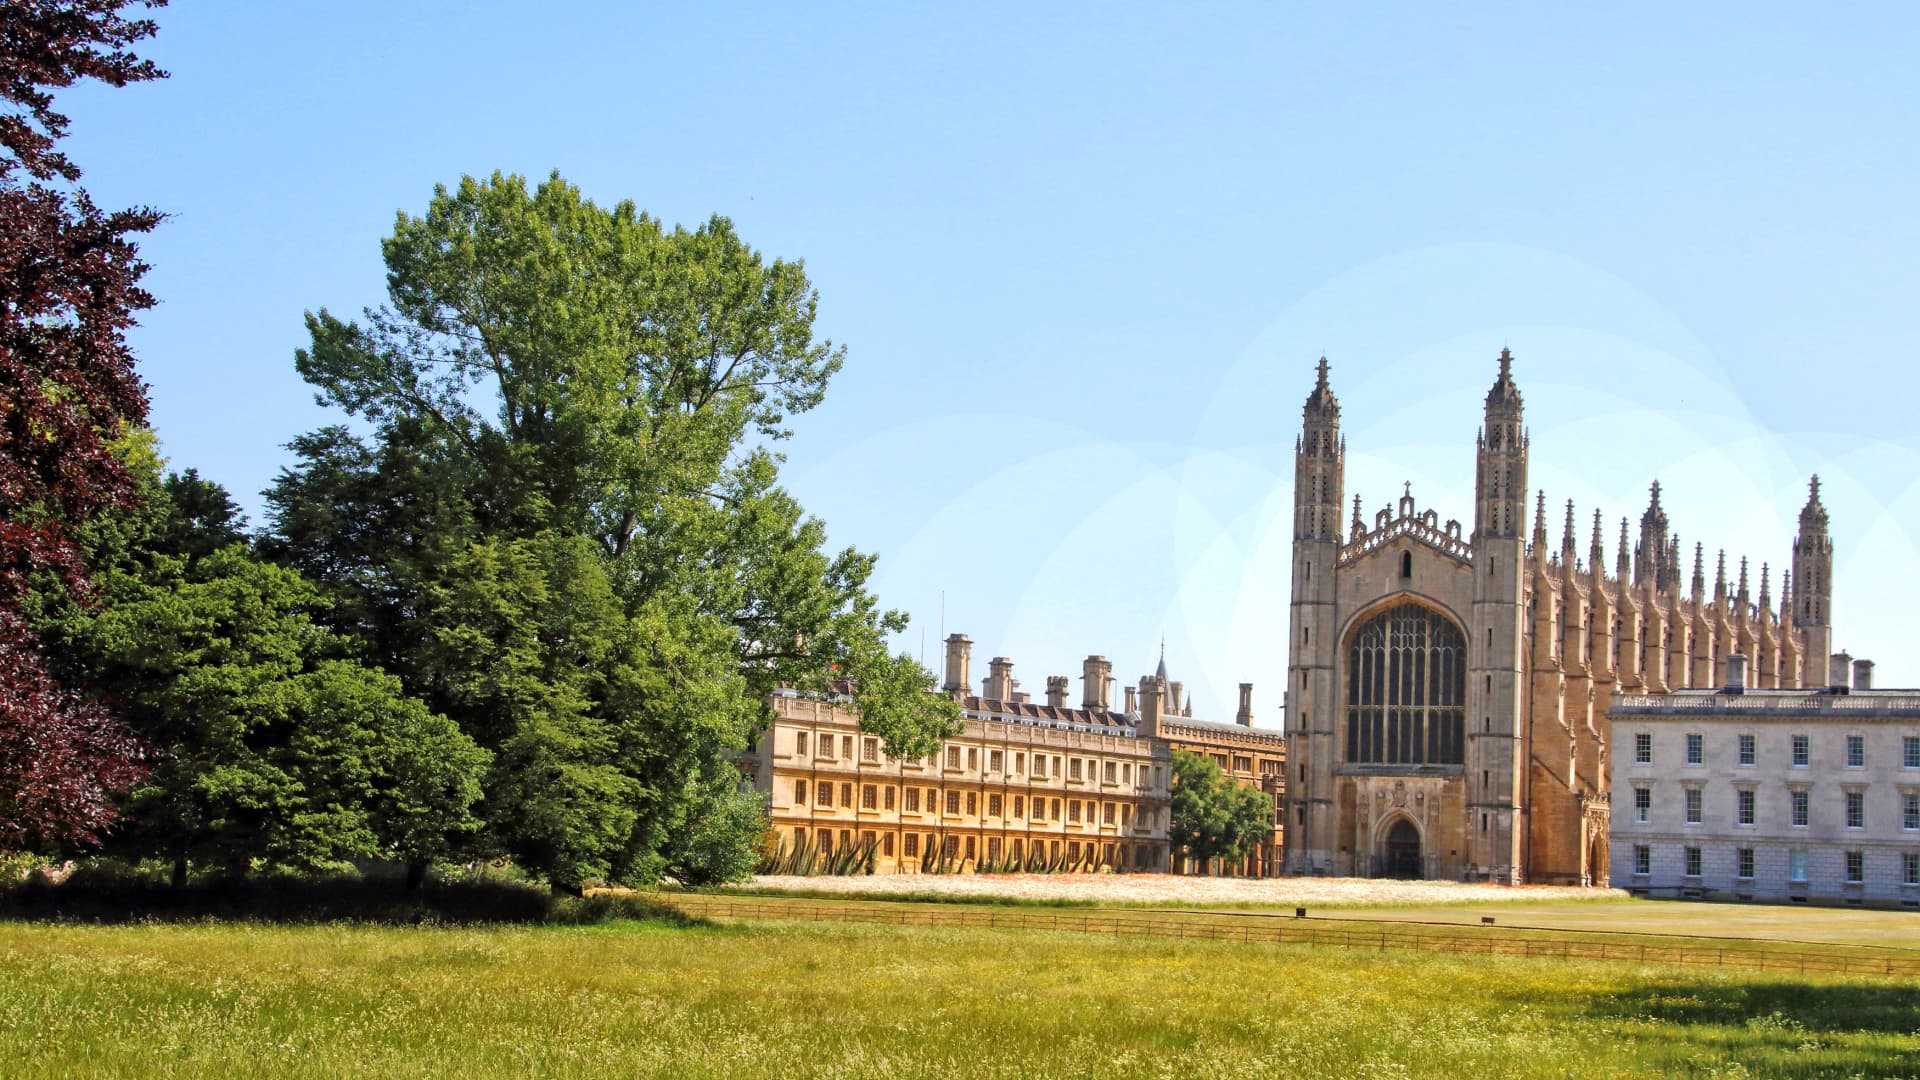 Kings College, Cambridge is pictured deserted due to the coronavirus outbreak.